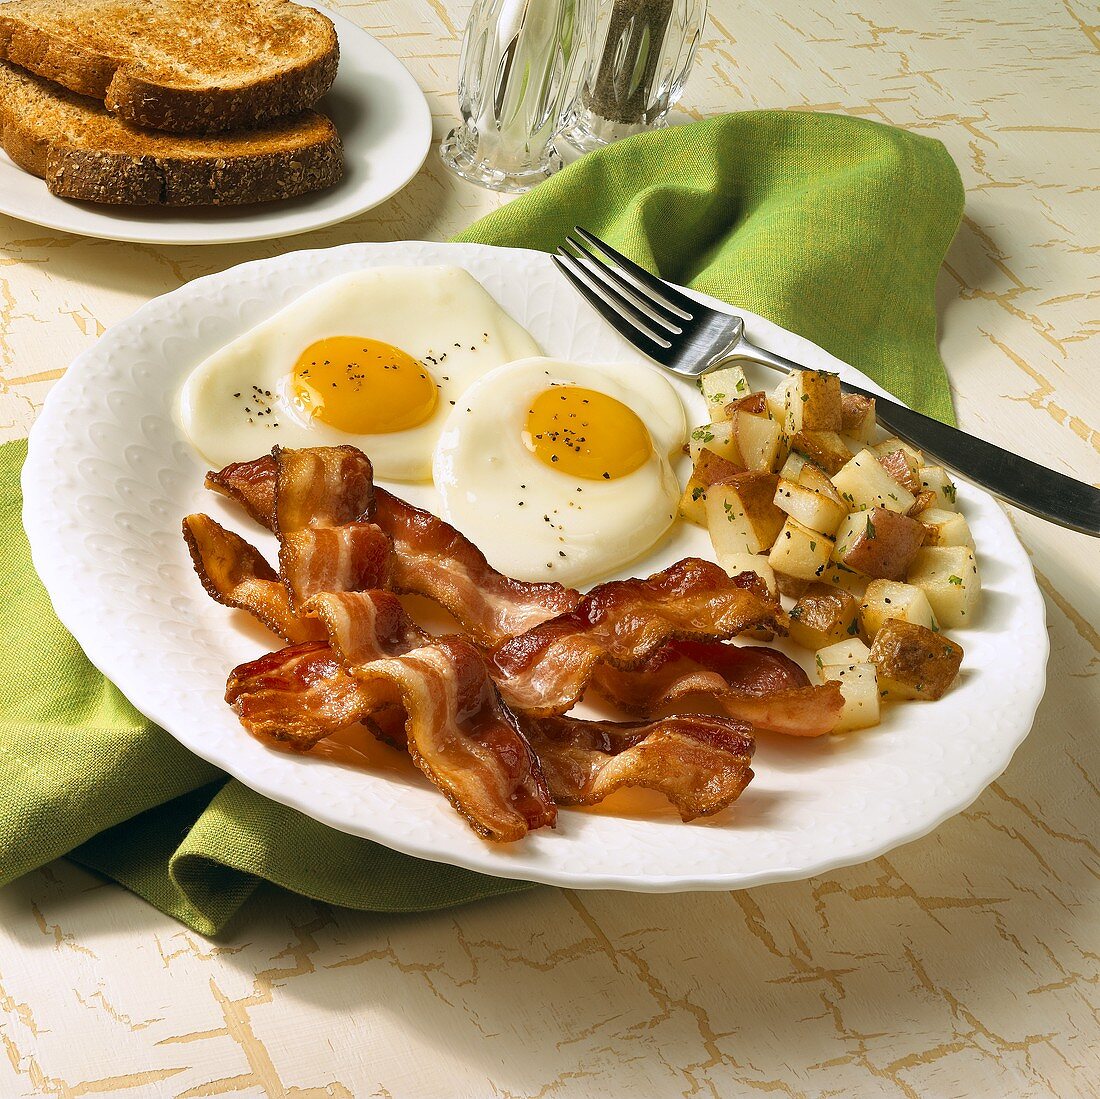 Breakfast Plate of Fried Eggs with Bacon and Home Fries on White Plate with Fork